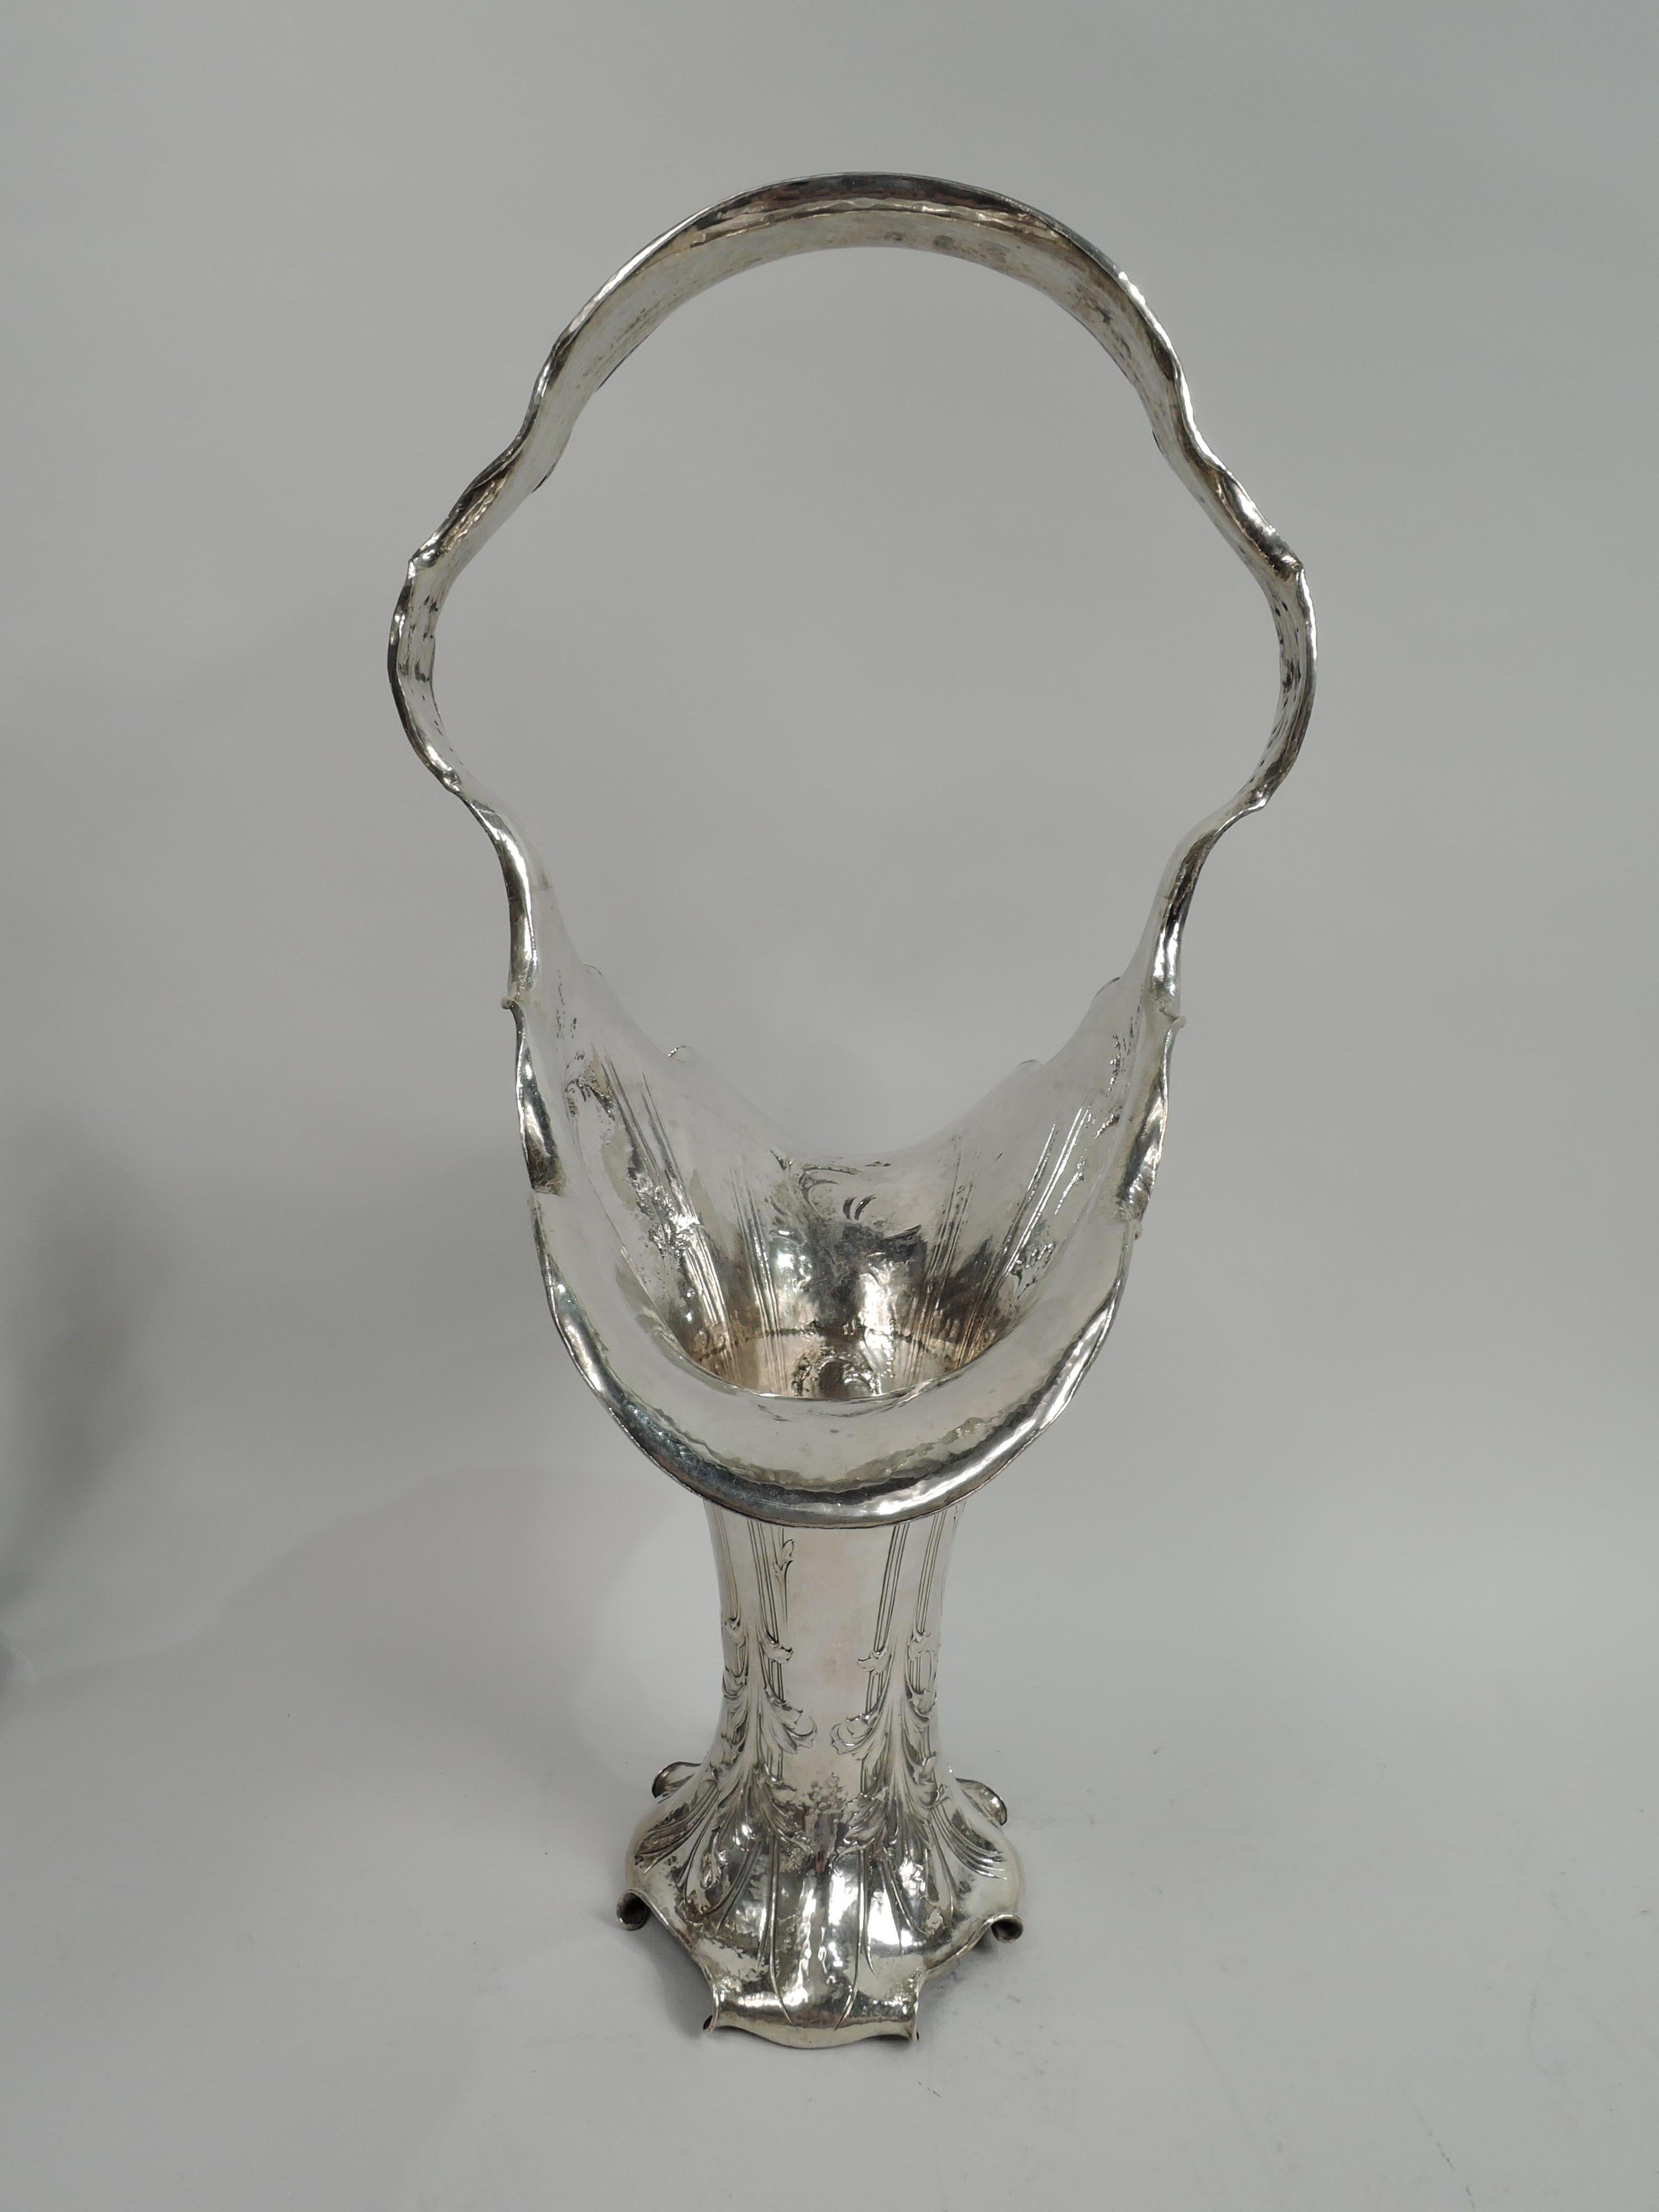 Gorgeous turn-of-the-century Martelé-style Art Nouveau 950 silver basket. Made by Black, Starr & Frost in New York. Flared and ovoid mouth fand cylindrical body flowing into spread foot on 4 turned-under scroll supports; fixed and shaped c-scroll